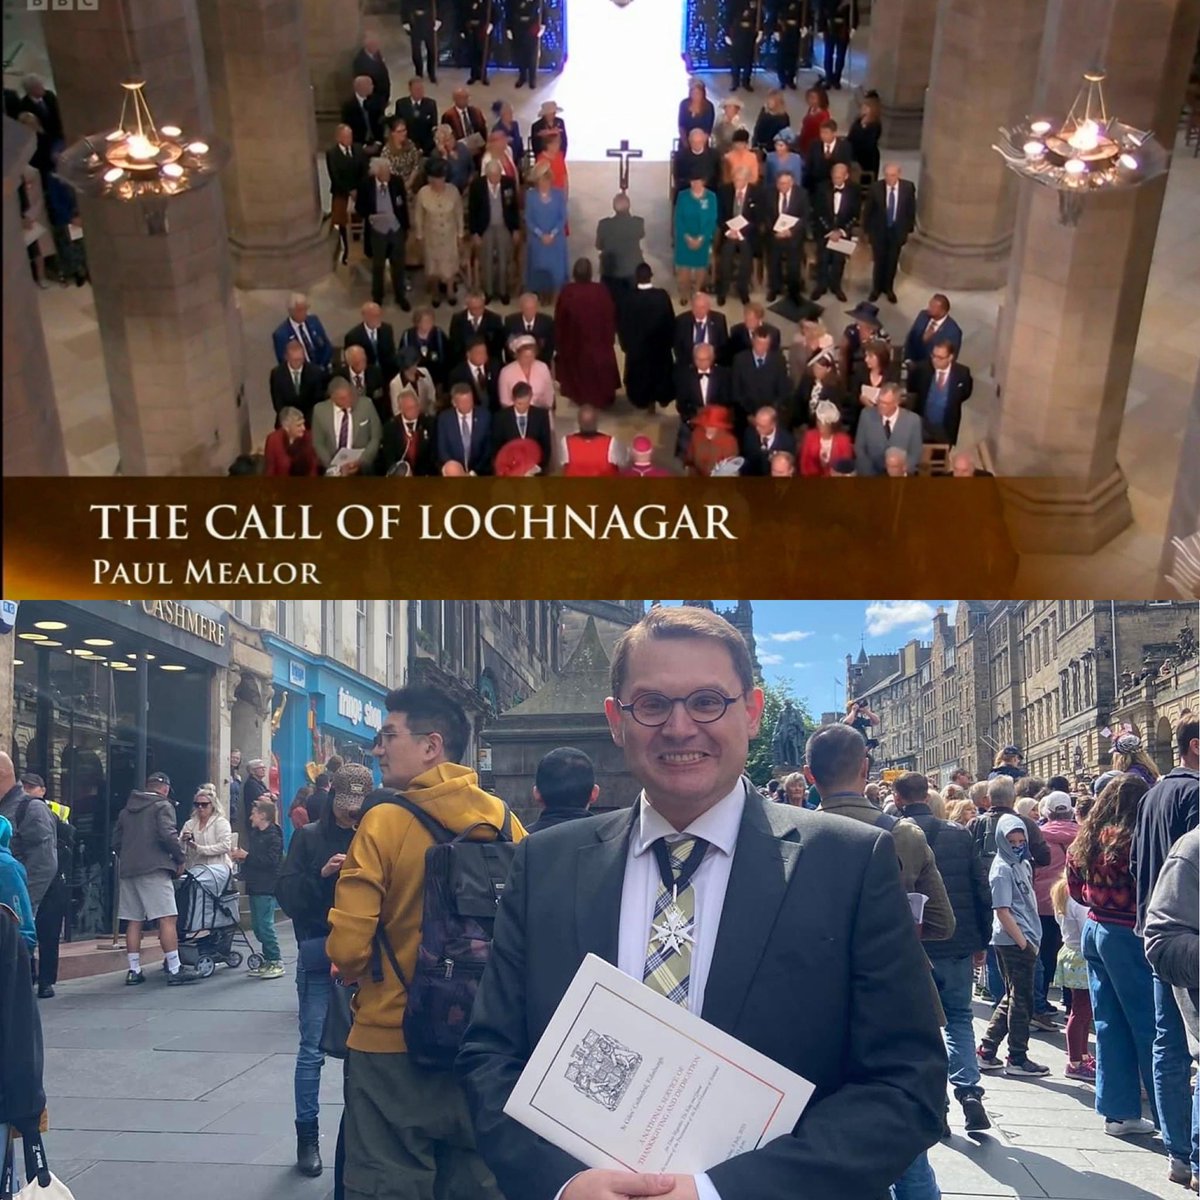 “The combination of a new orchestra and the Fanfare Trumpeters of the RAF plus the cathedral organ, produced a soaring debut for a processional piece called The Call of Lochnagar… Expect to hear that at future royal events.” Robert Hardman (Royal Commentator, The Daily Mail)